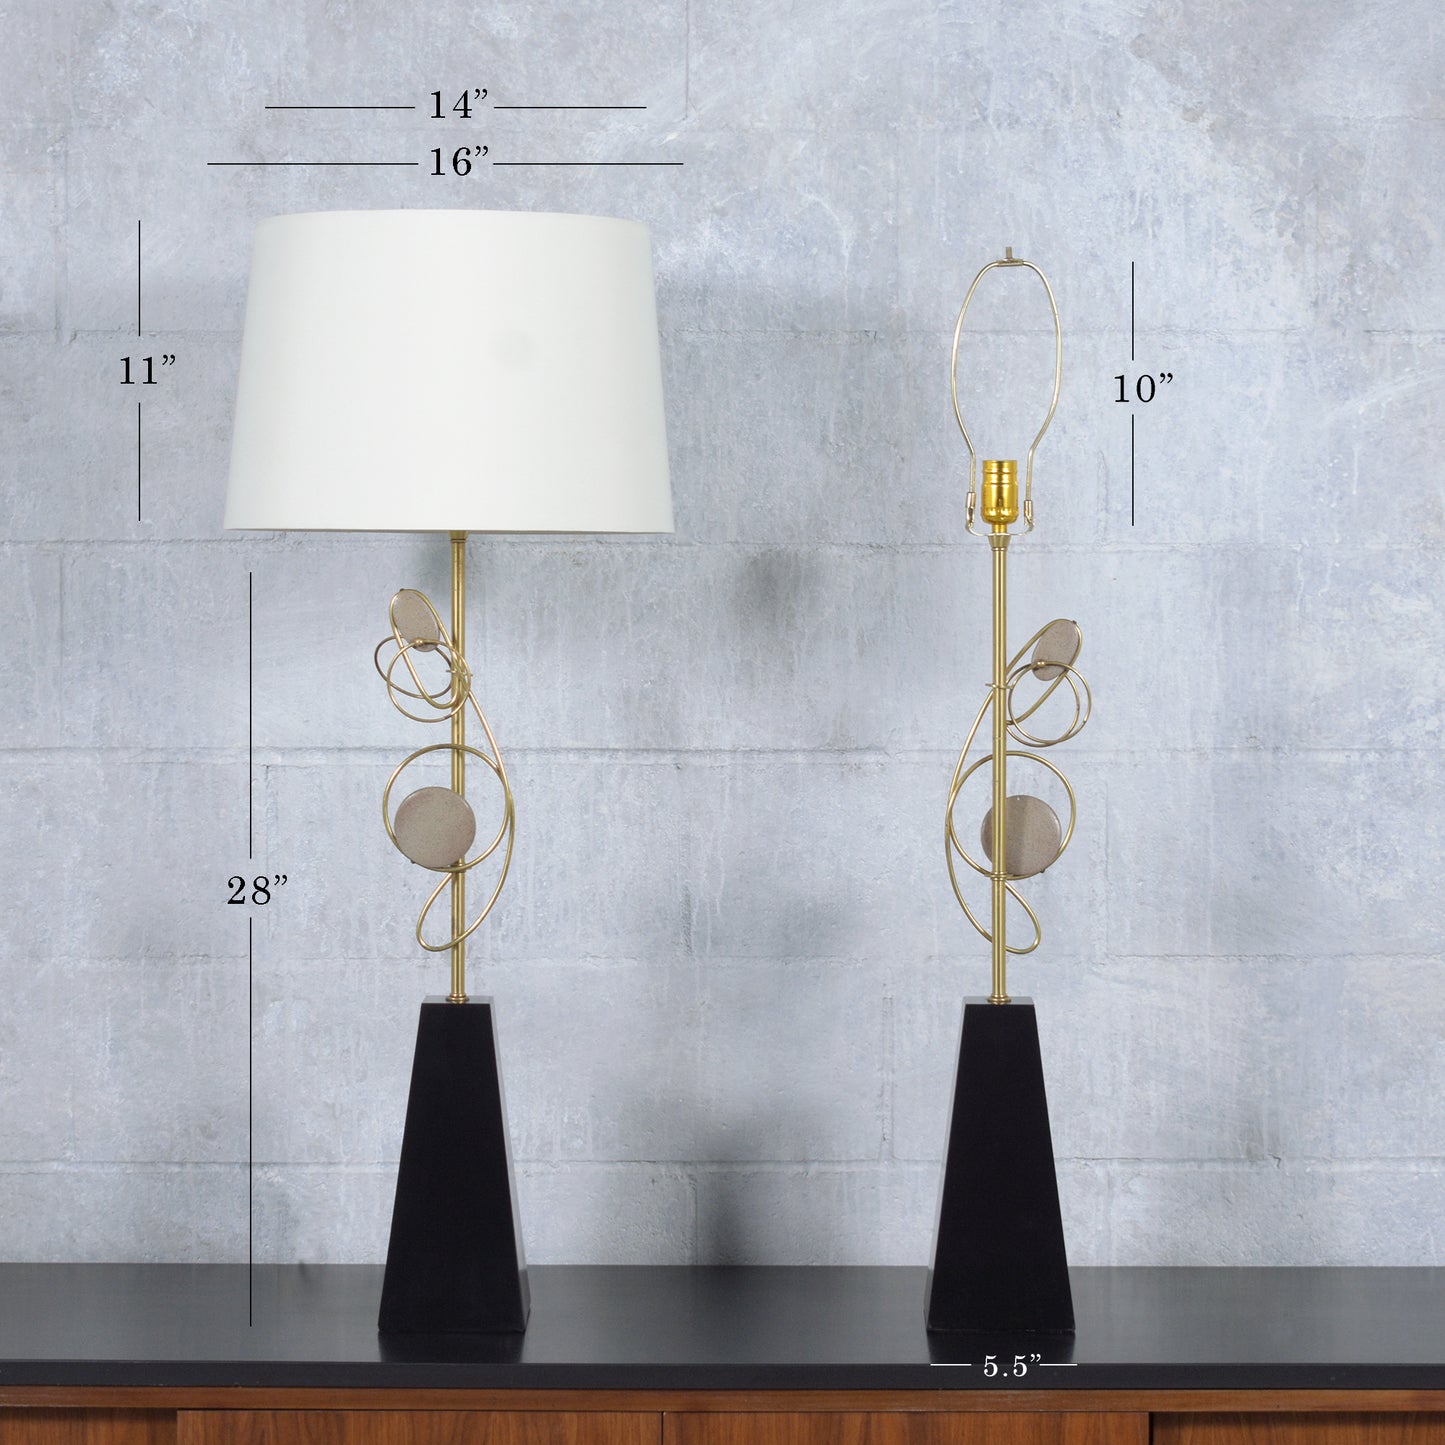 1960s Mid-Century Modern Wood & Brass Table Lamps with Fabric Shades